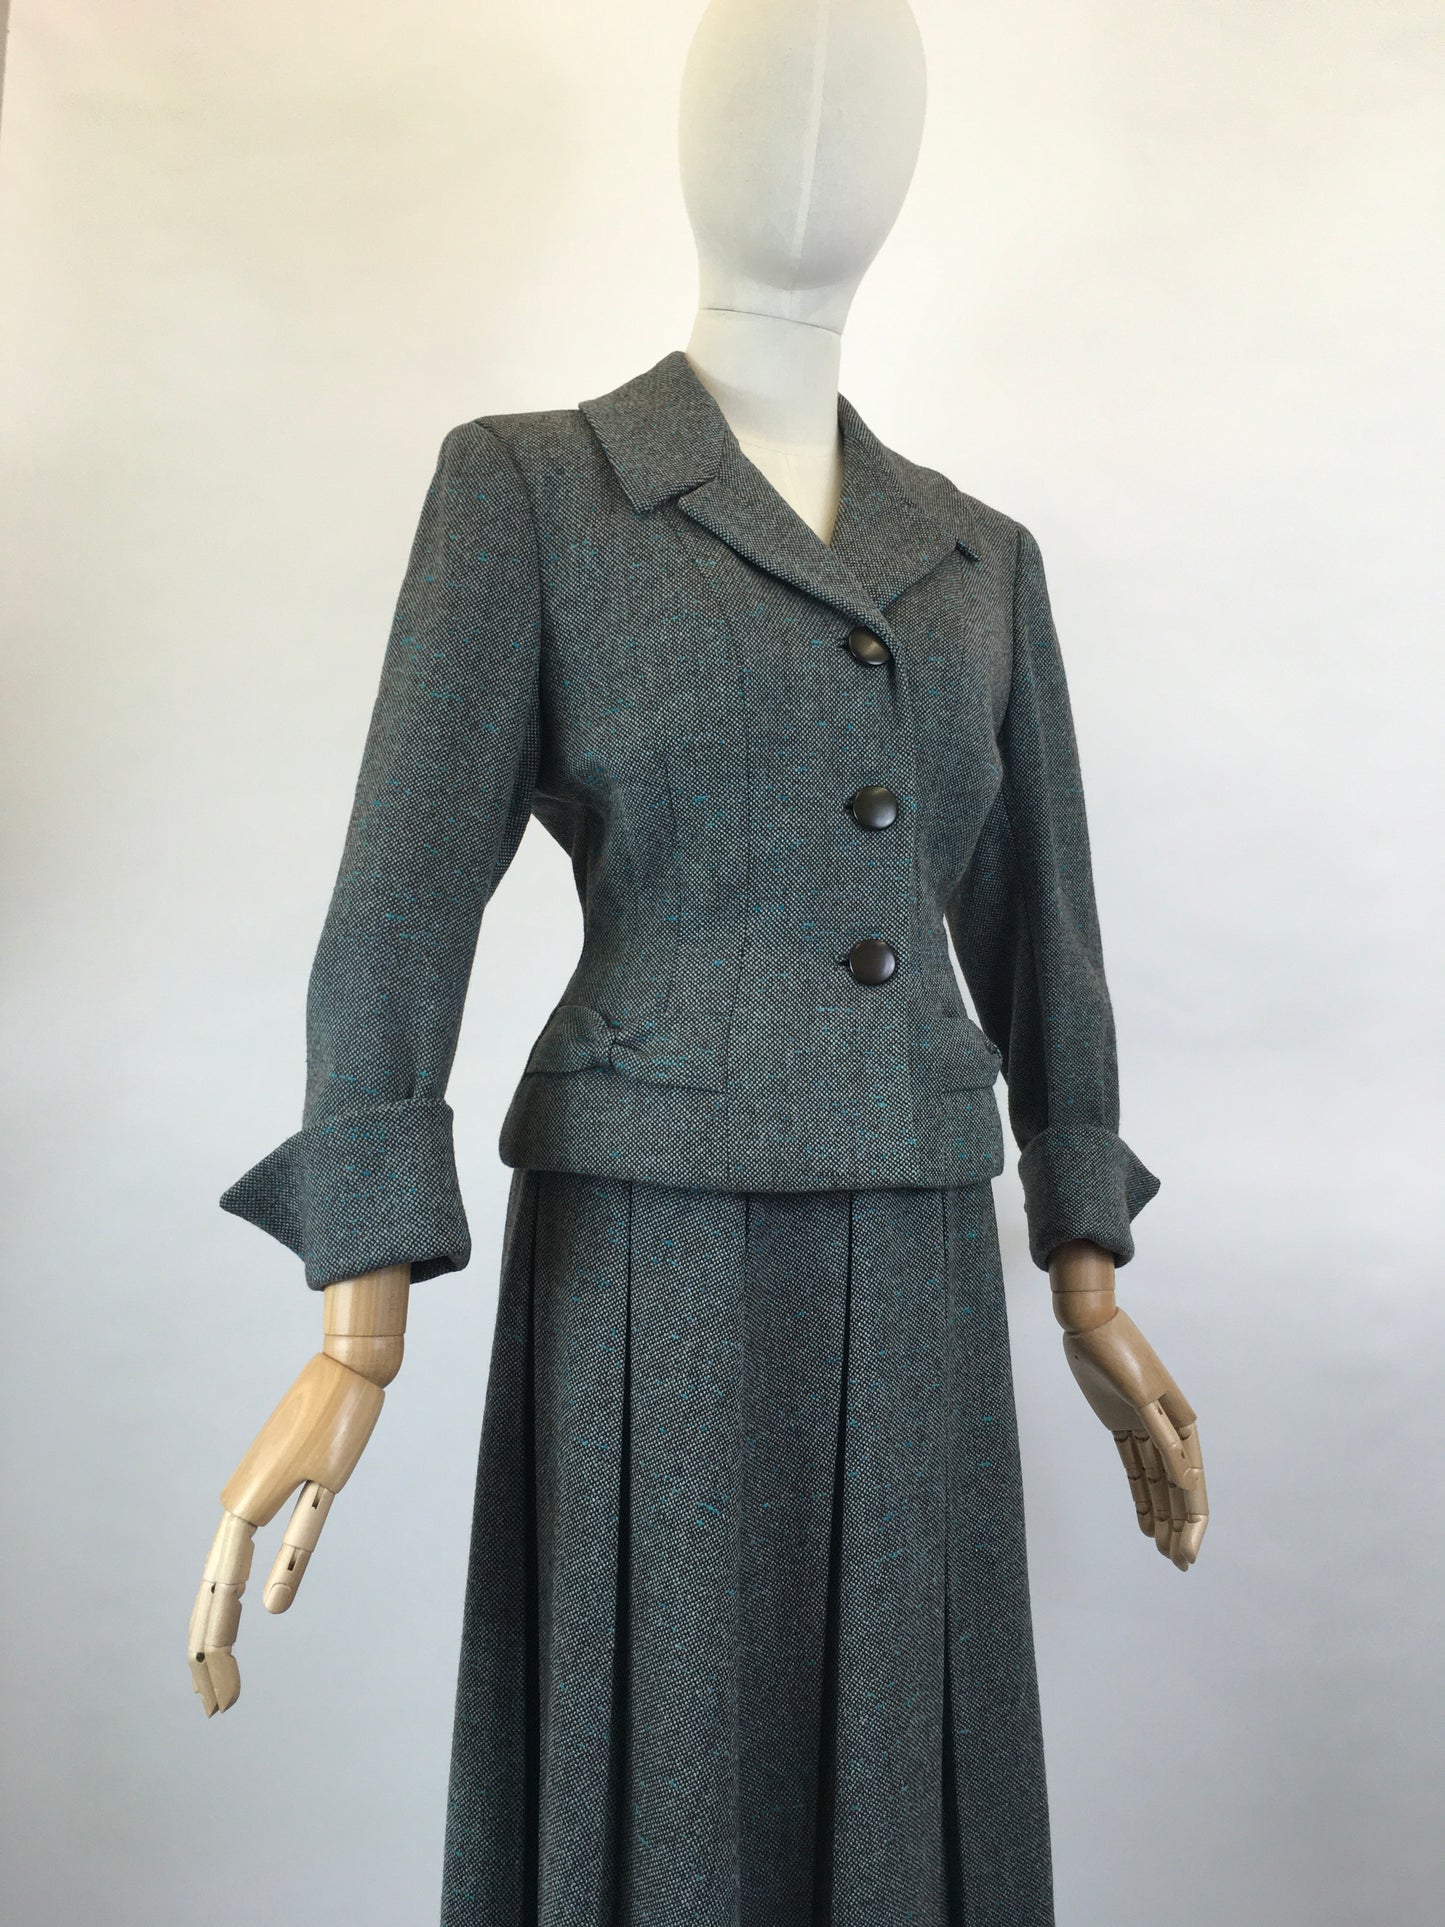 Original late 1940’s 2pc Woollen Suit by ‘ Harella’ - Grey Toned with a Bright Teal Fleck